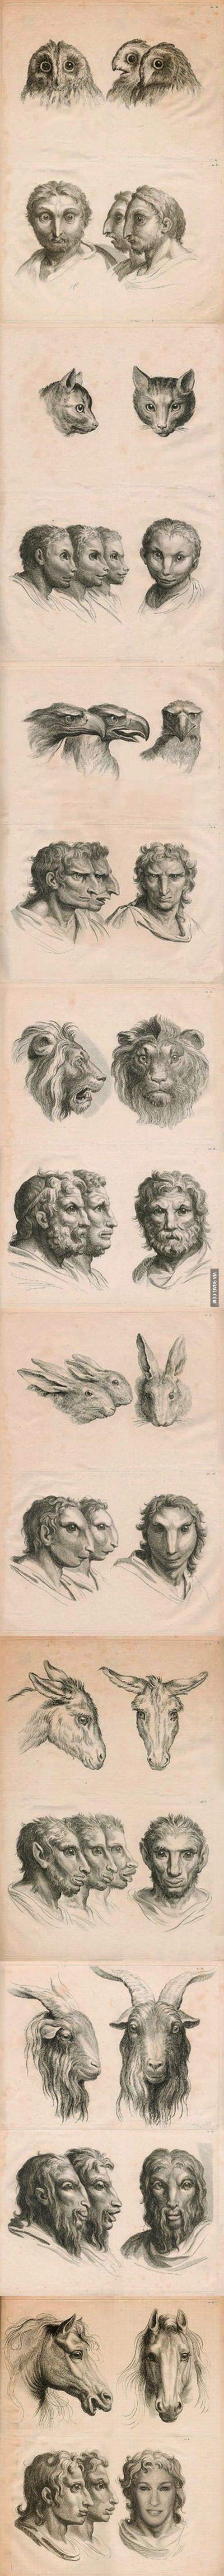 Pencil drawings of what humans would look like if they had evolved from different animal heritages other than apes. Interesting work on possible races, facial distinctions, etc.